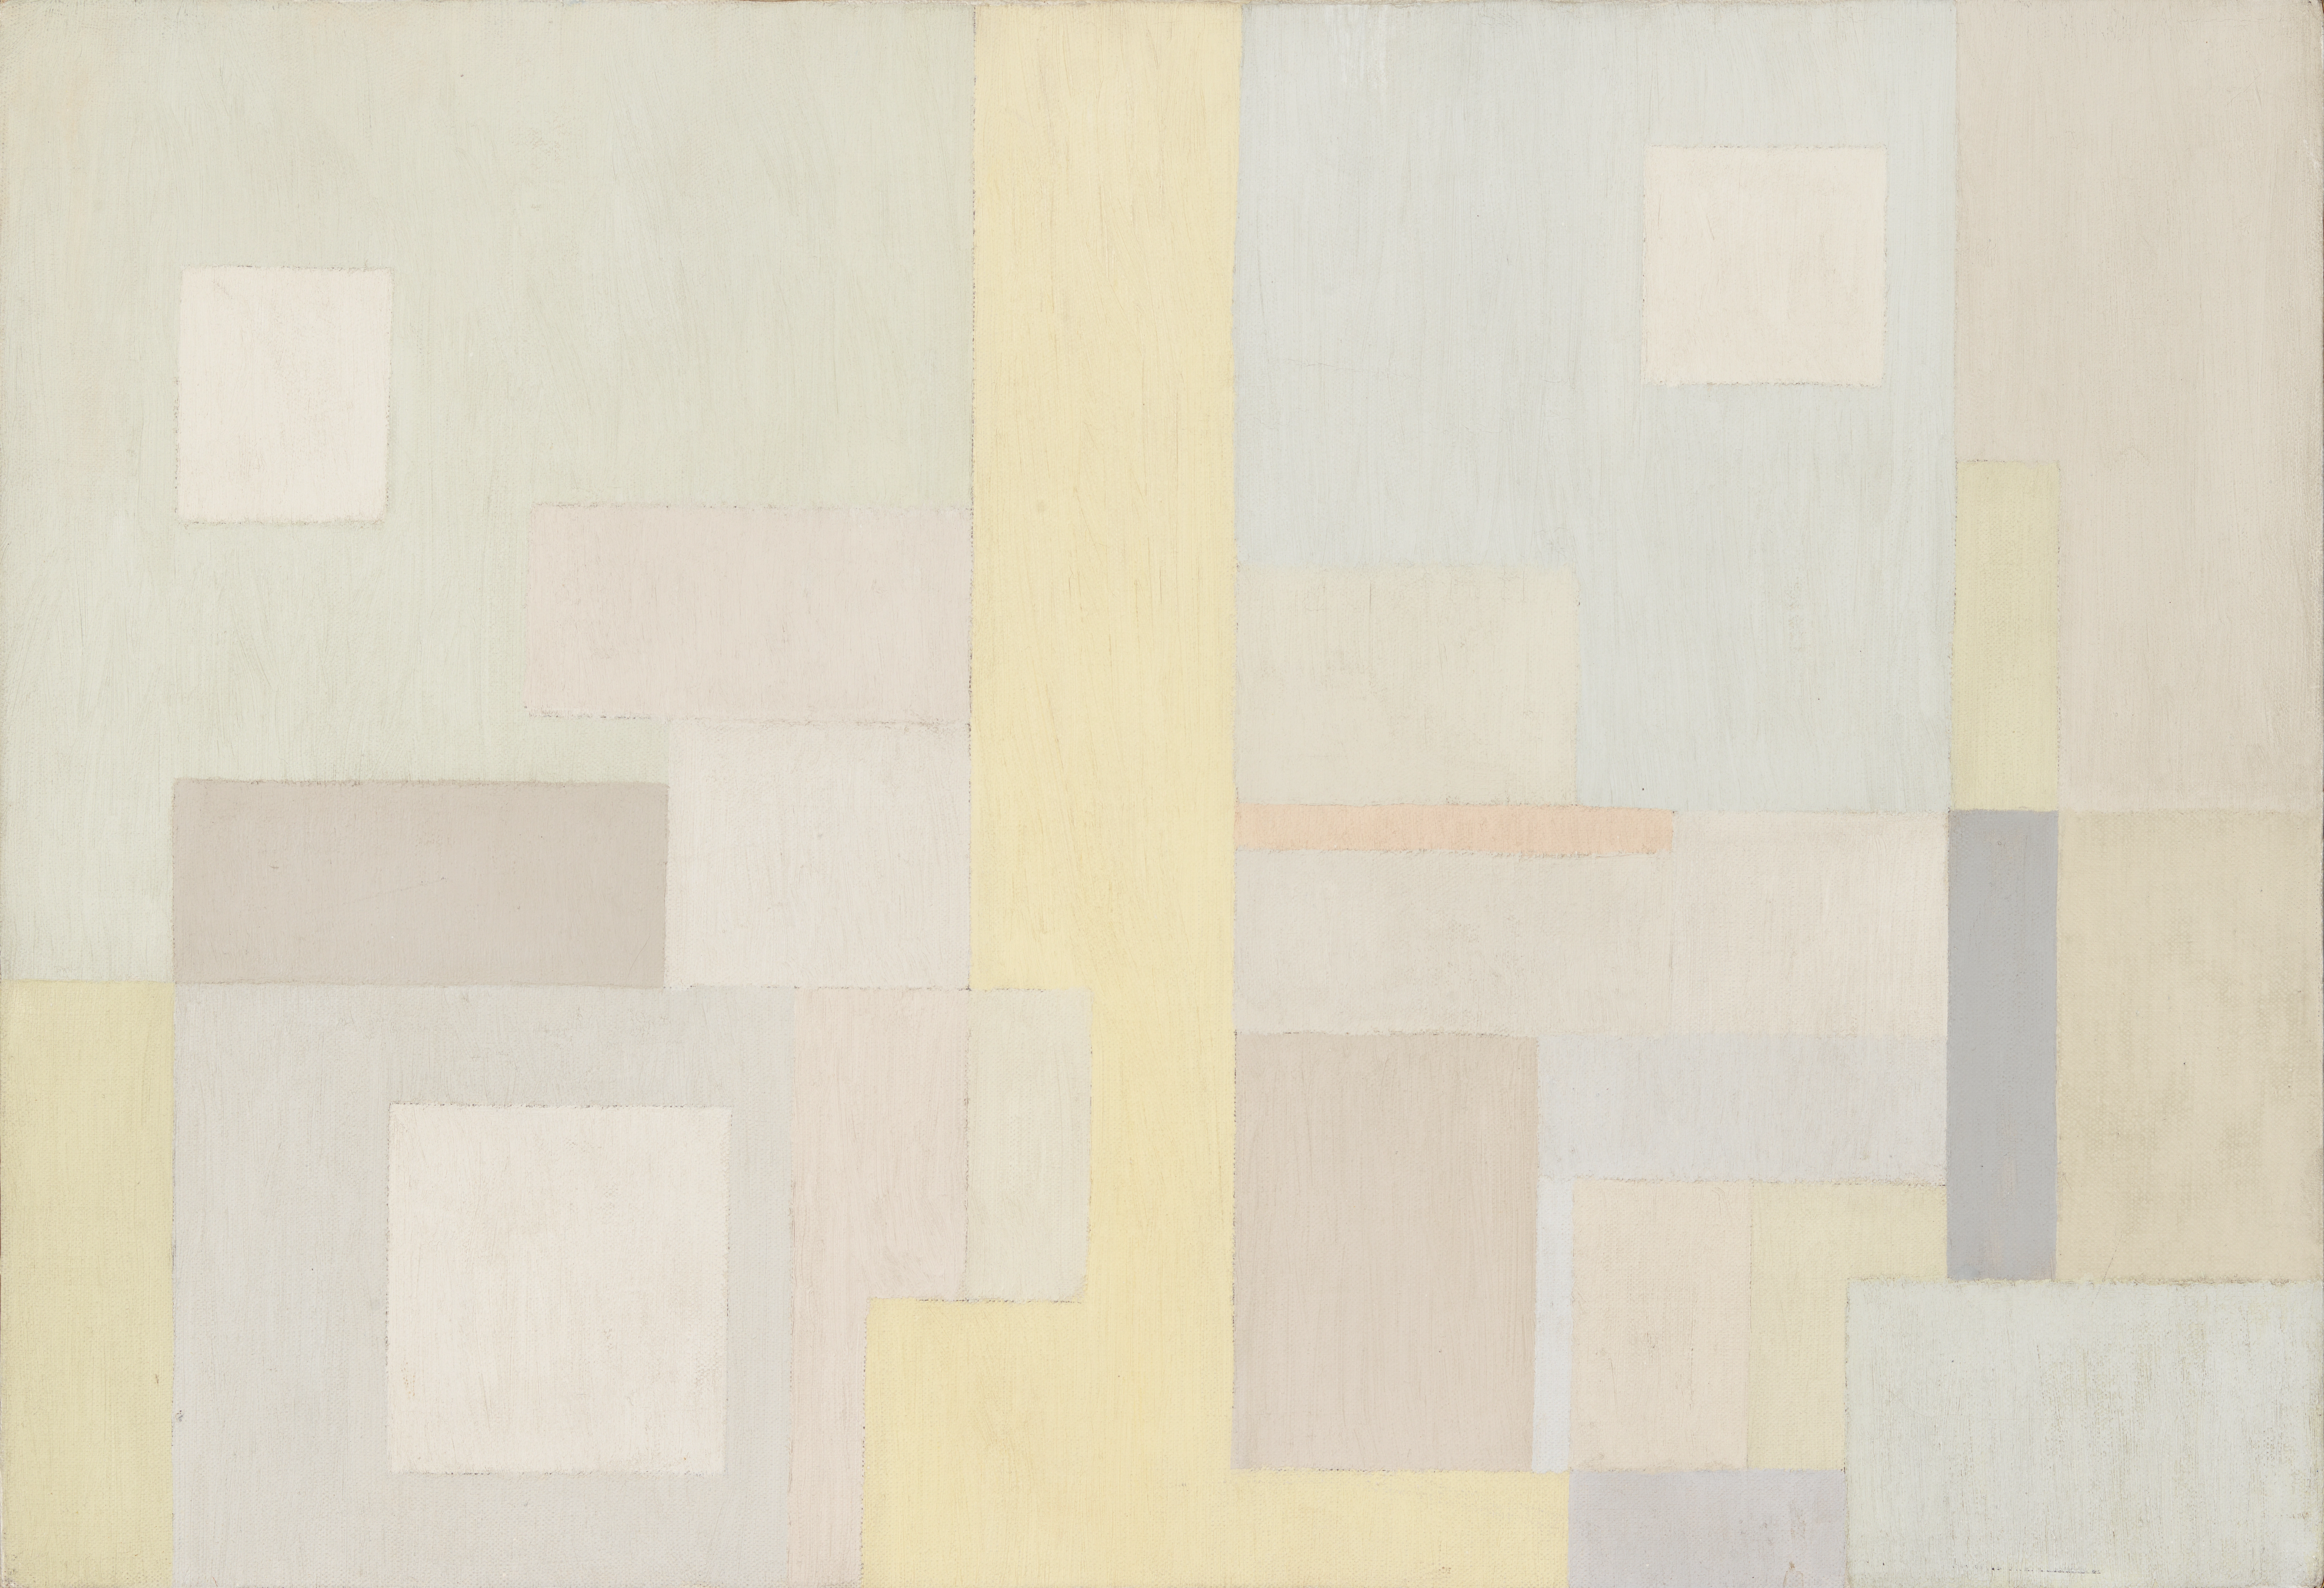 Abstract oil on canvas painting, comprised of layered squares and rectangles that are light, muted tones of grey, beige, yellow, and white.